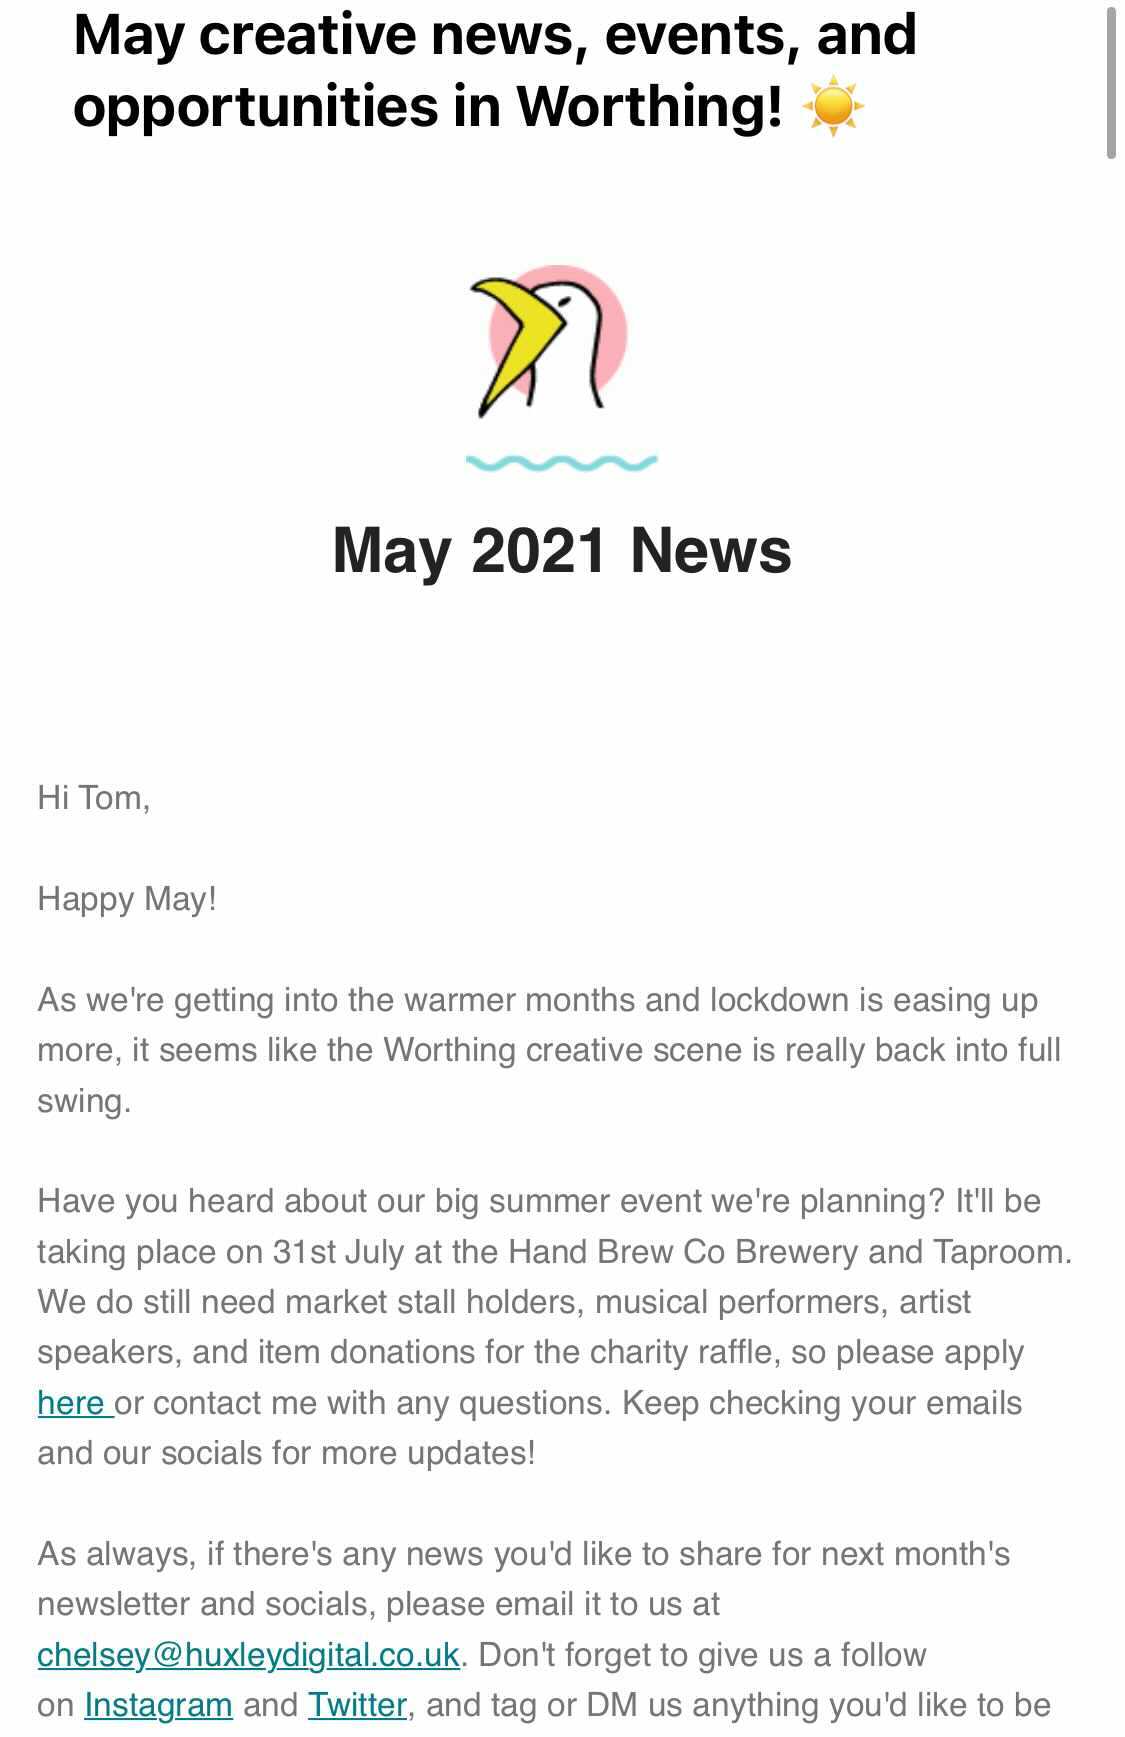 A screenshot of May's Worthing & Beyond newsletter